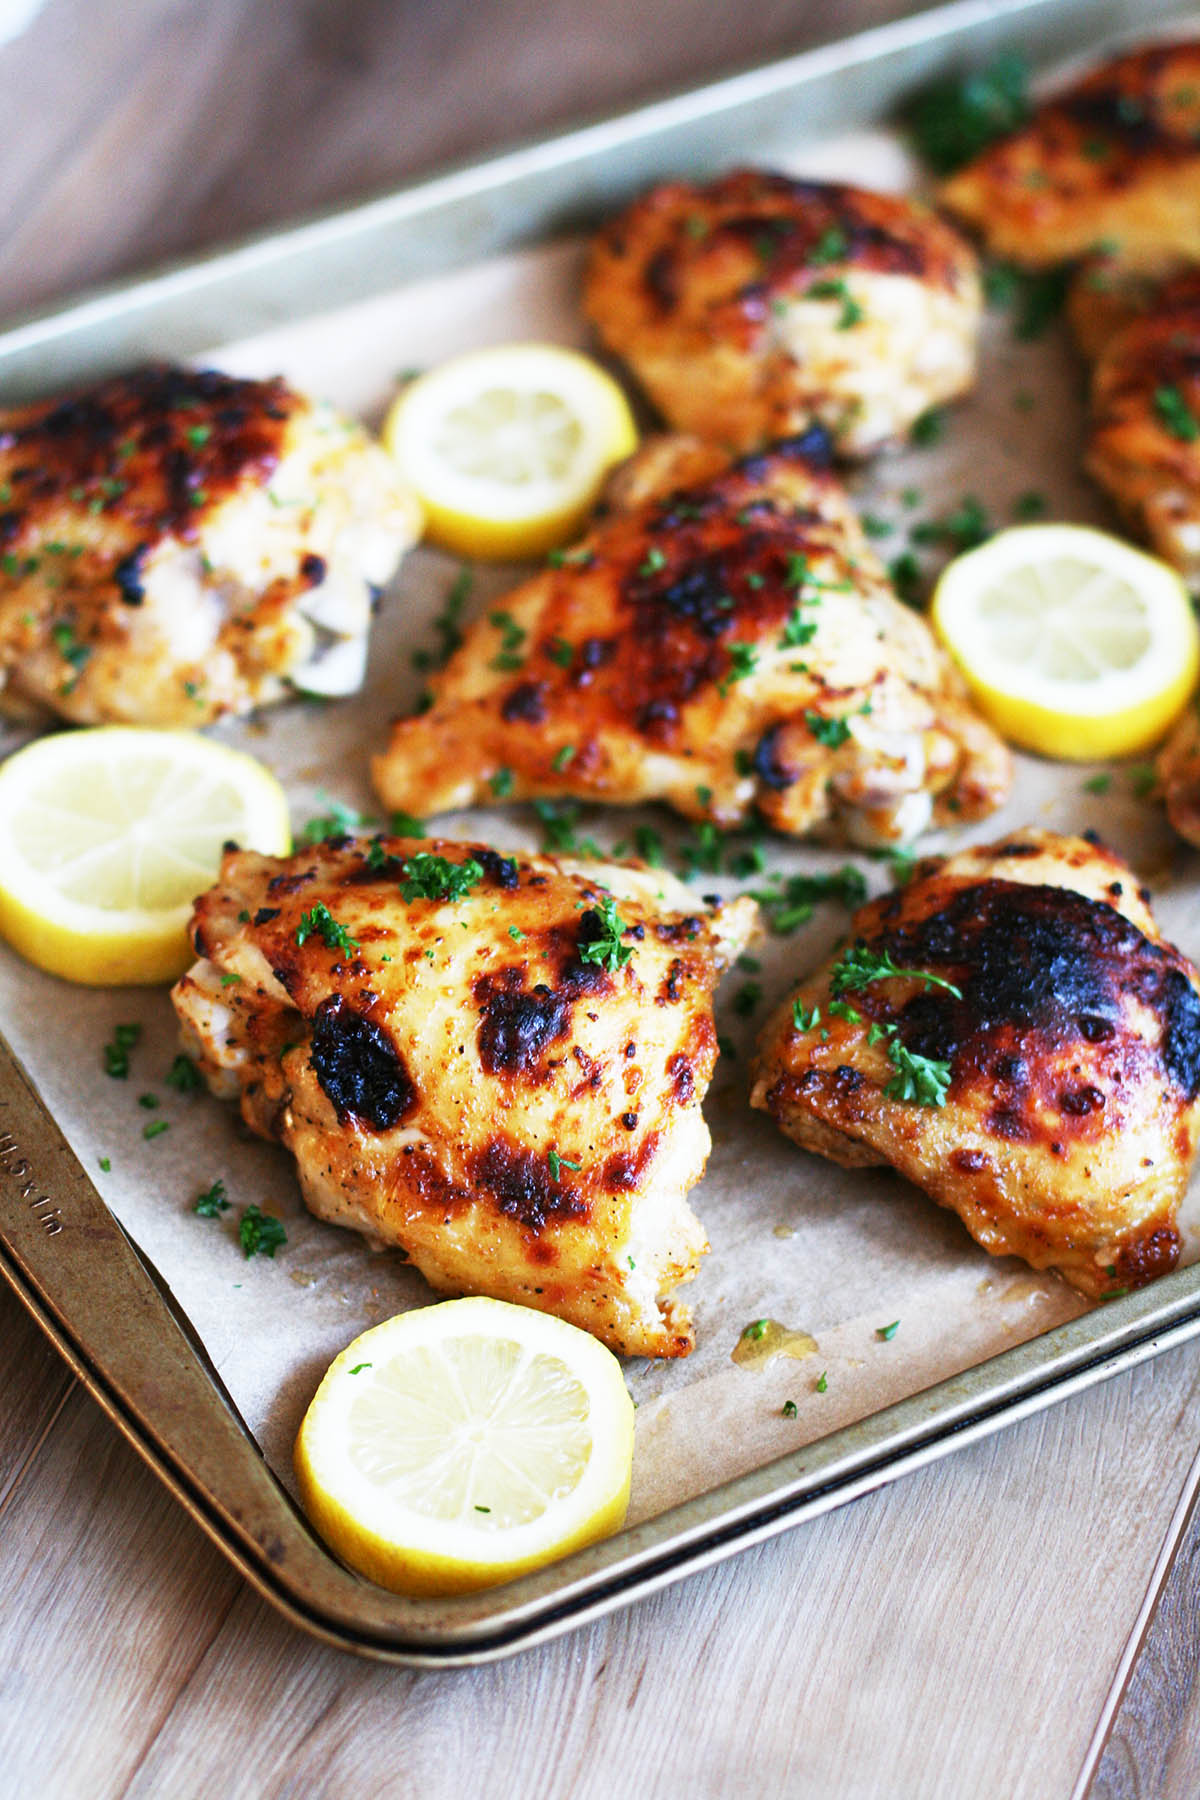 How to make baked chicken thighs that are juicy and flavorful.